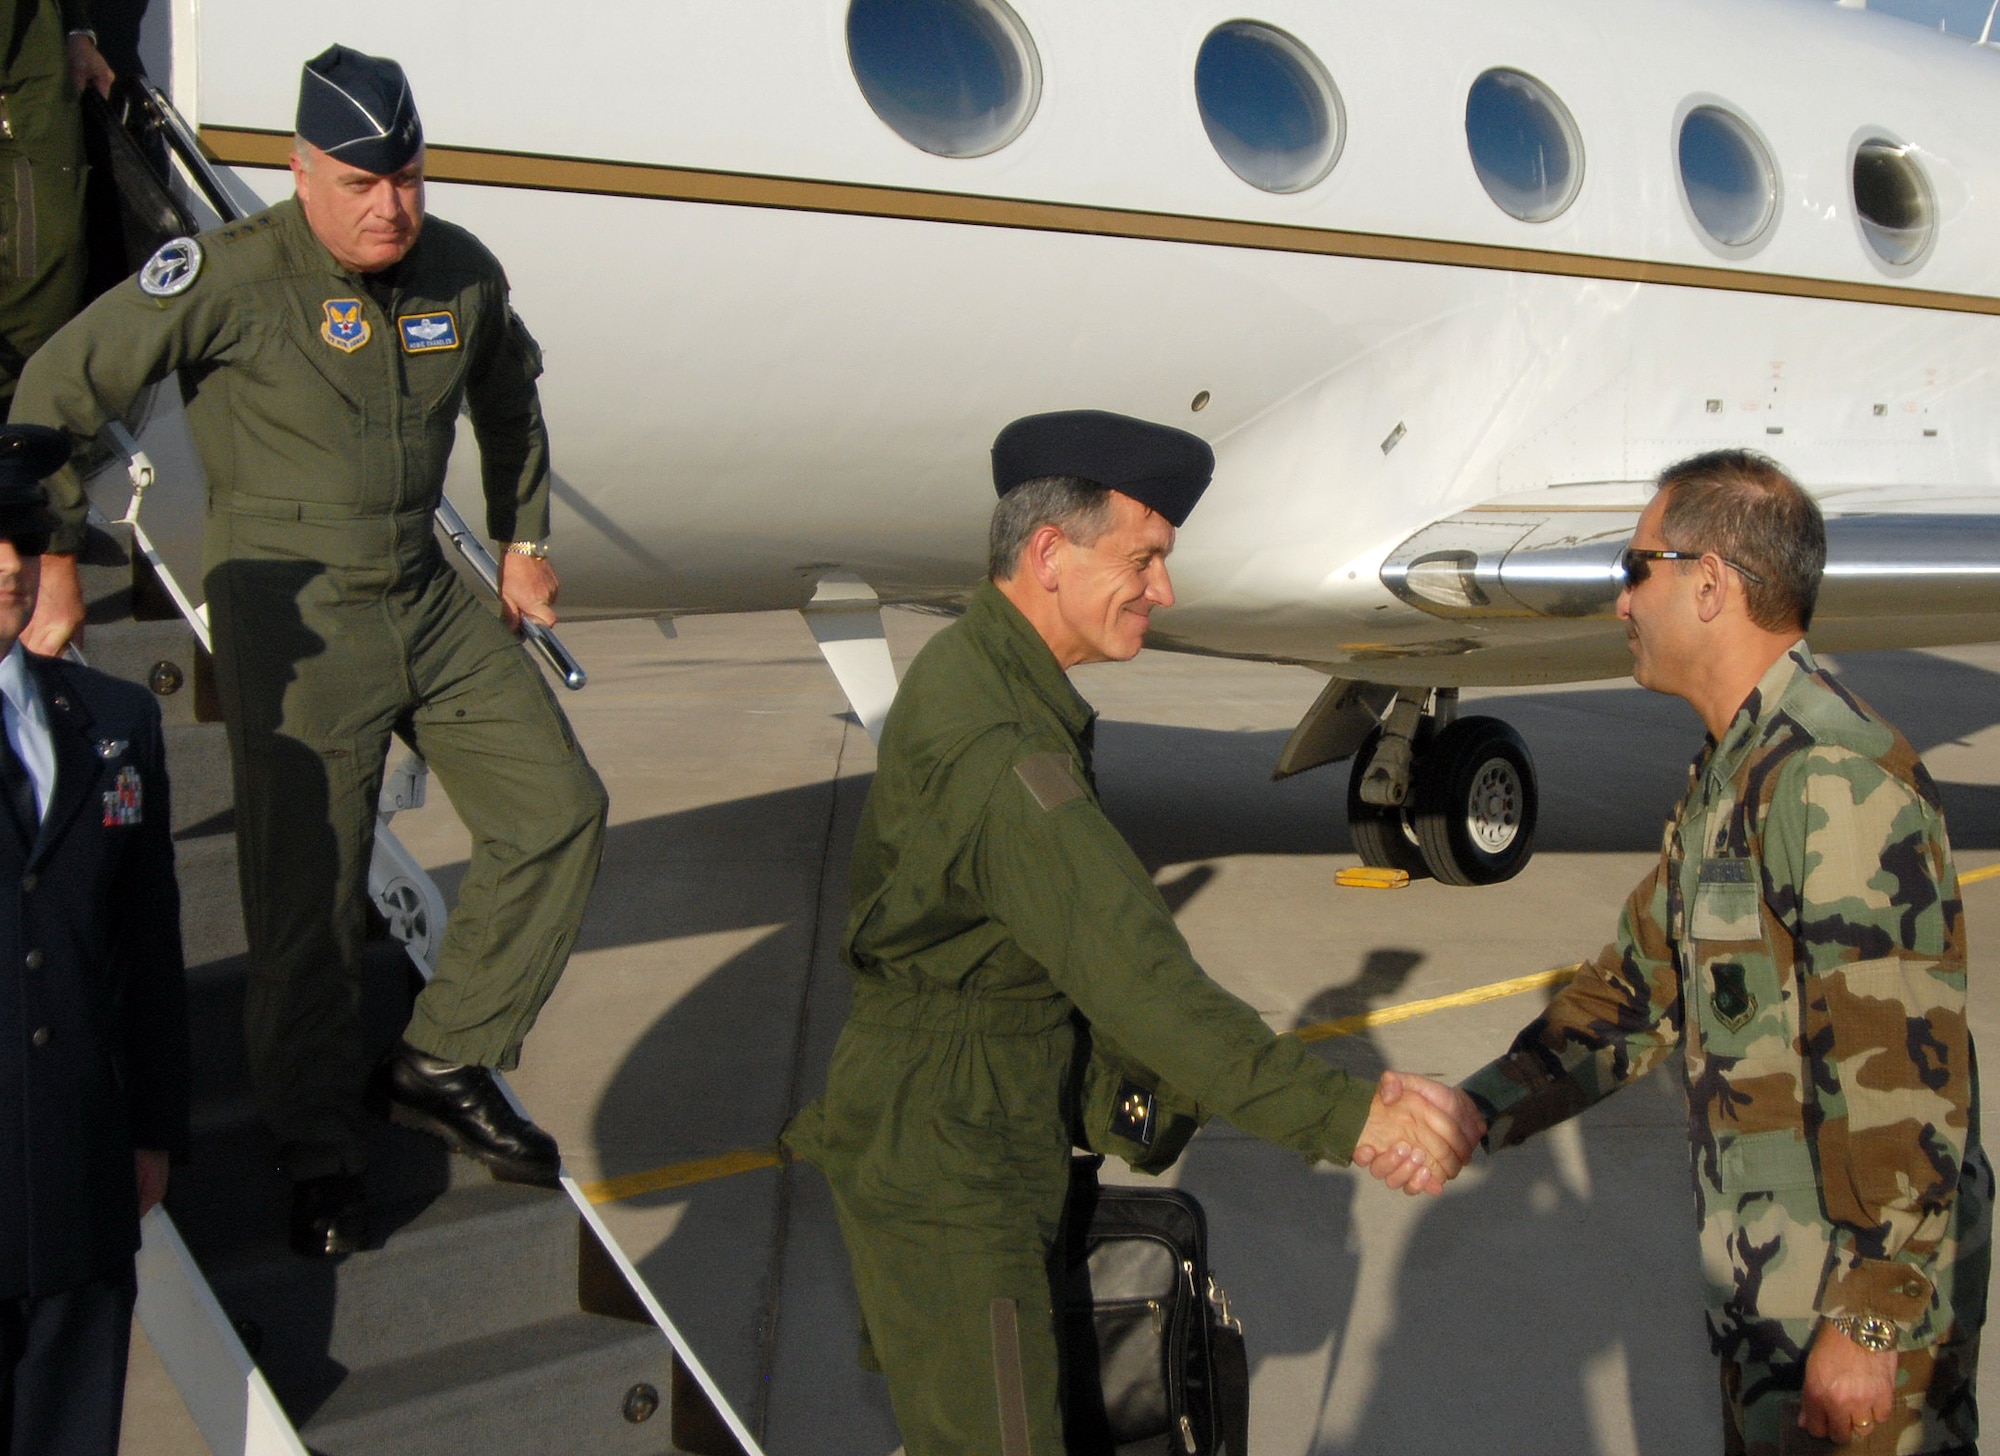 French Lt. Gen. Jean-Paul Palomeros, vice chief of staff of the French air force, shakes hands with Col. Mohsen Parhizkar, 377th Air Base Wing vice commander, upon the general?s arrival here. During his May 9-10 visit, the general toured the 58th Special Operations Wing with Lt. Gen. Howie Chandler, deputy chief of staff for Operations, Plans and Requirements, Headquarters U.S. Air Force, Washington, D.C., who is stepping off the plane.  U.S. Air Force photo by Laurence Zankowski